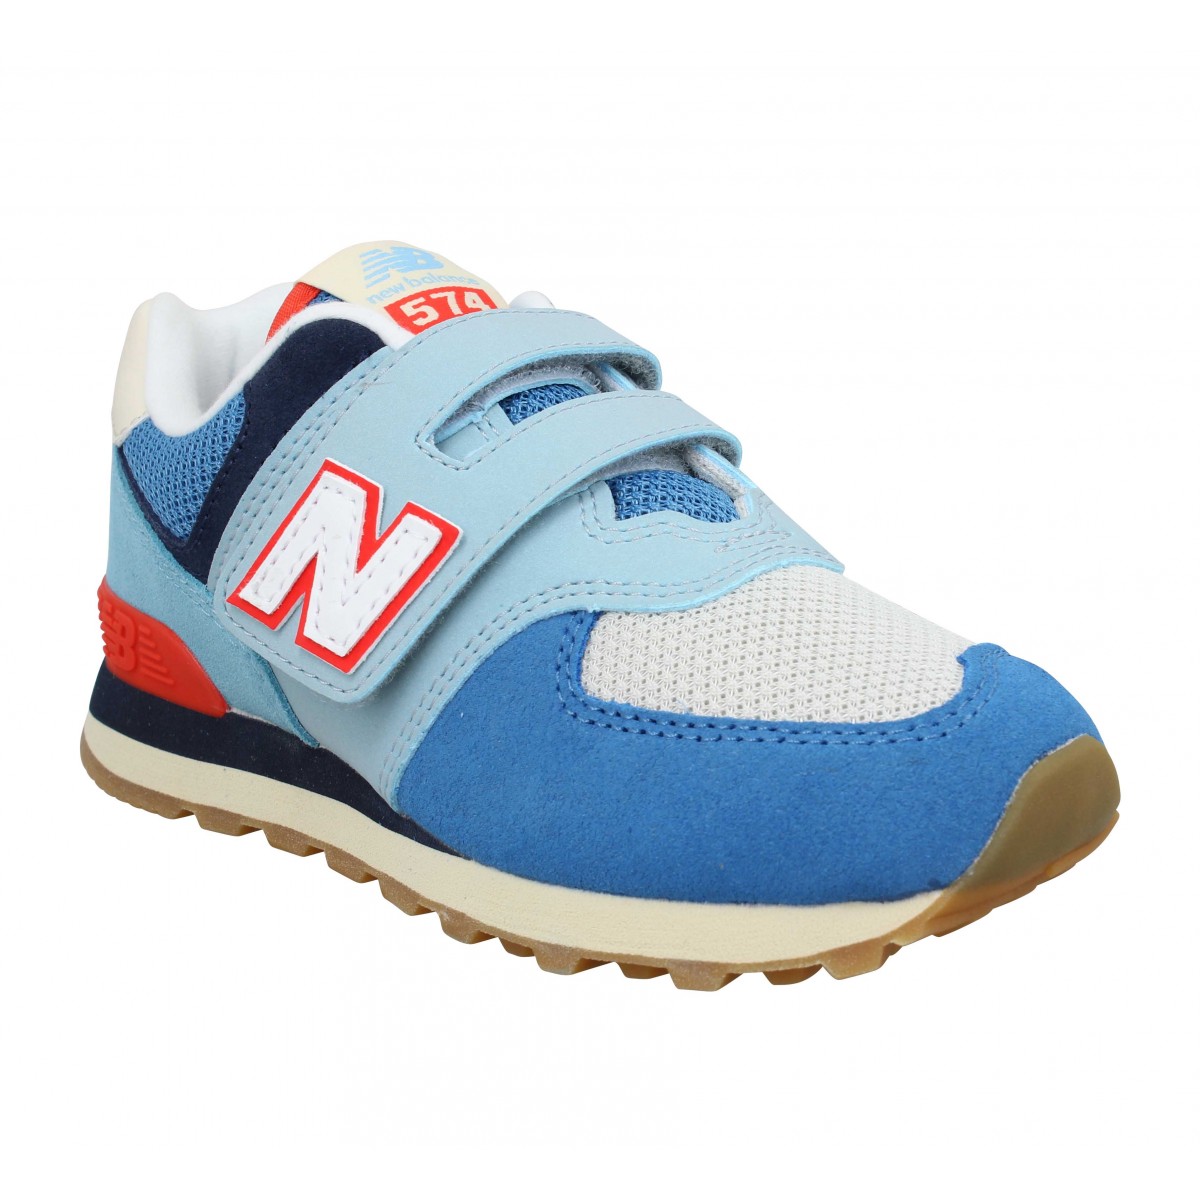 baskets new balance garcon, OFF 77%,where to buy!